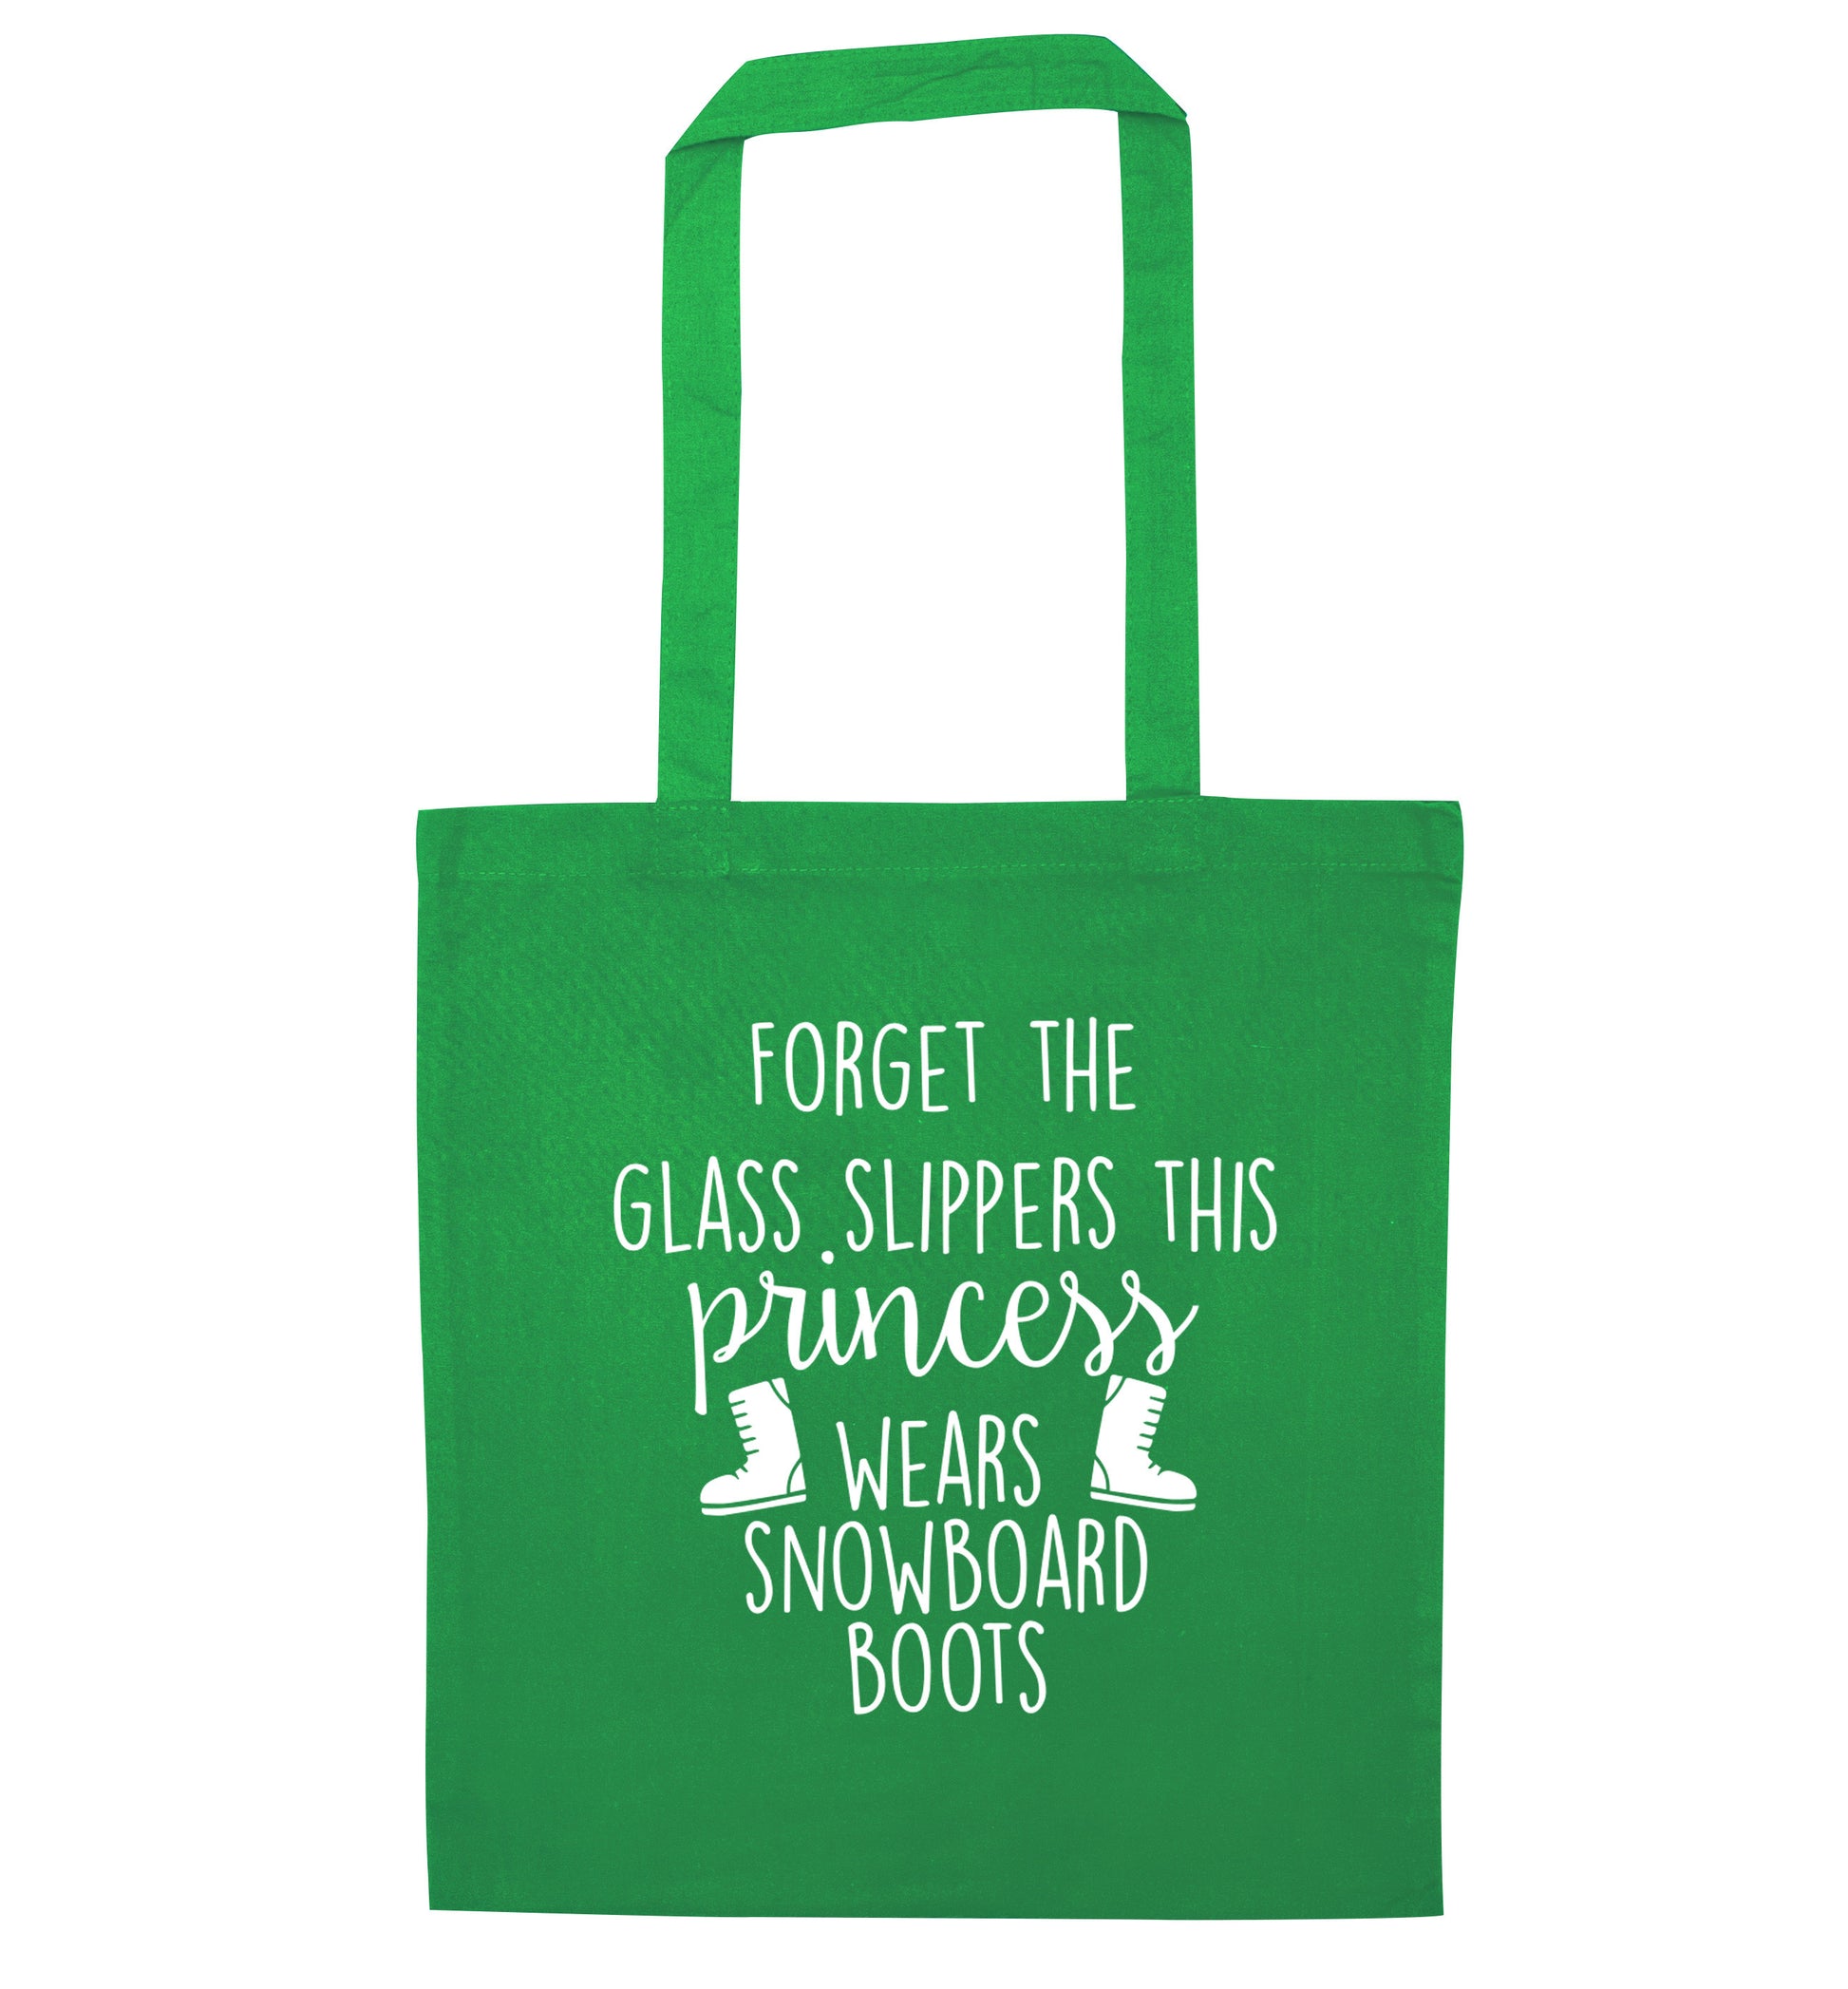 Forget the glass slippers this princess wears snowboard boots green tote bag